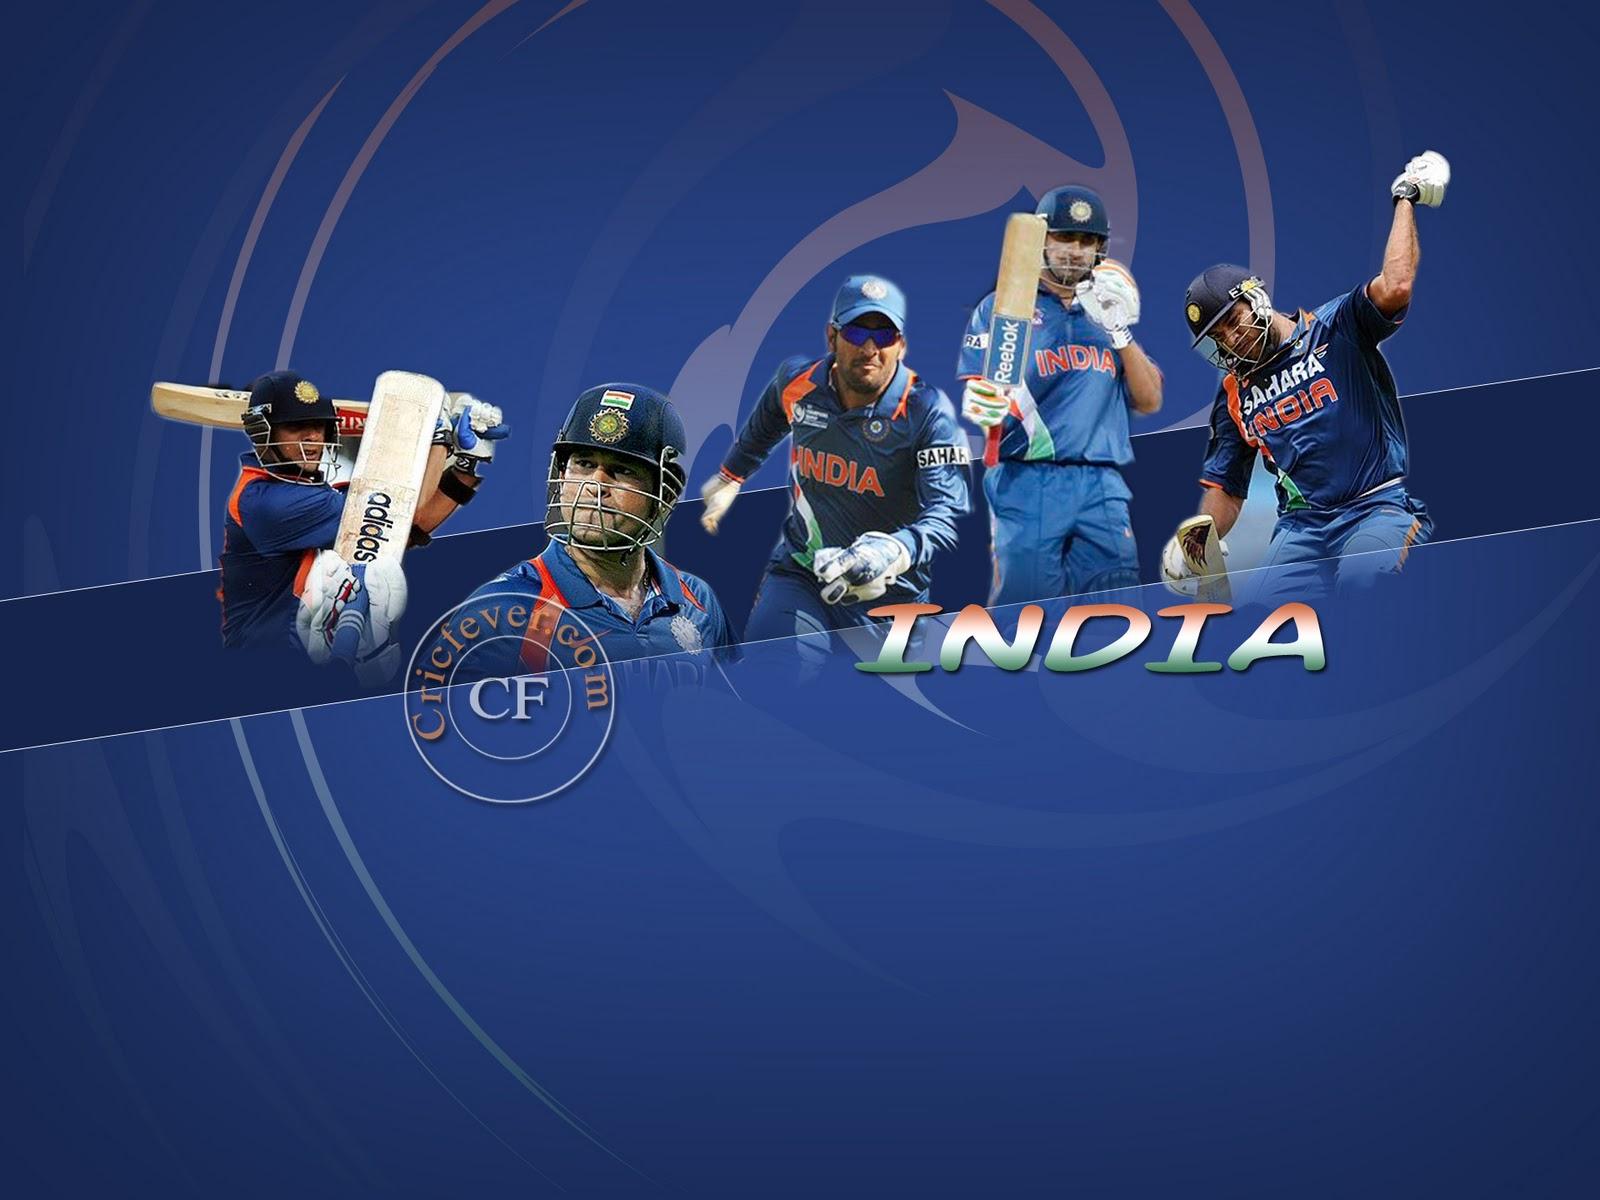 Team India For Icc World Cup Wallpaper Cricket Team